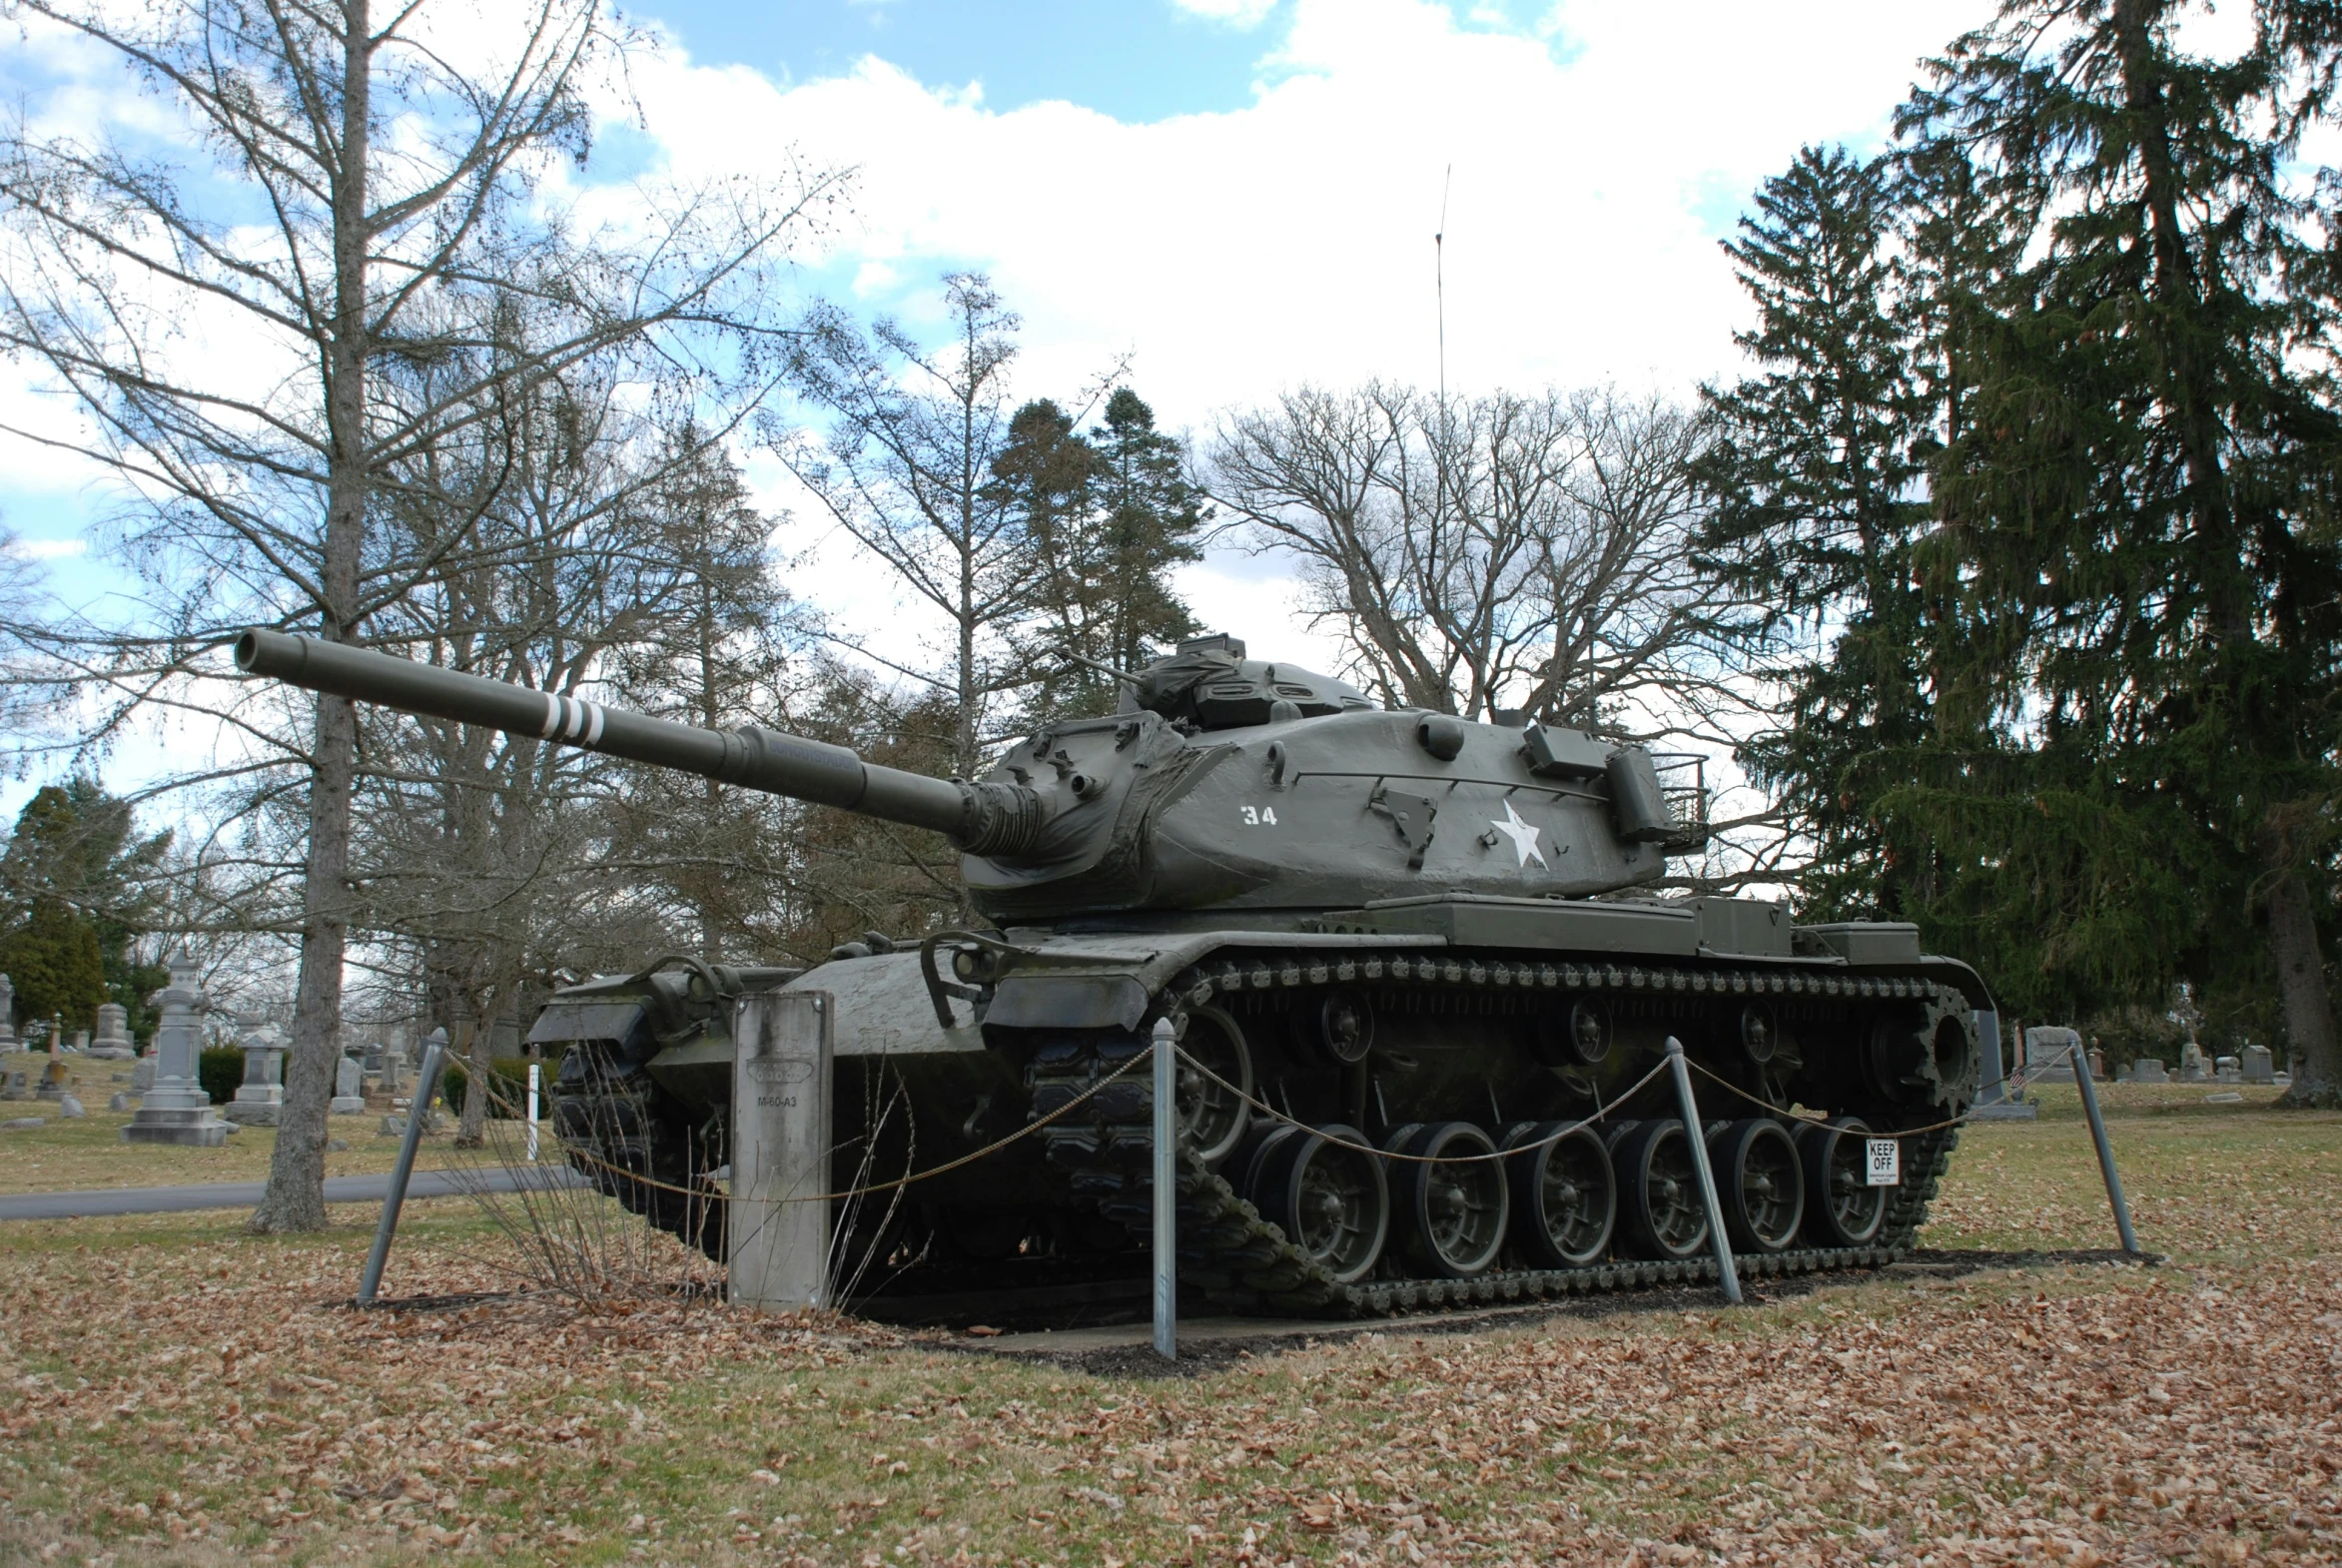 an old sherman tank on display in the grass